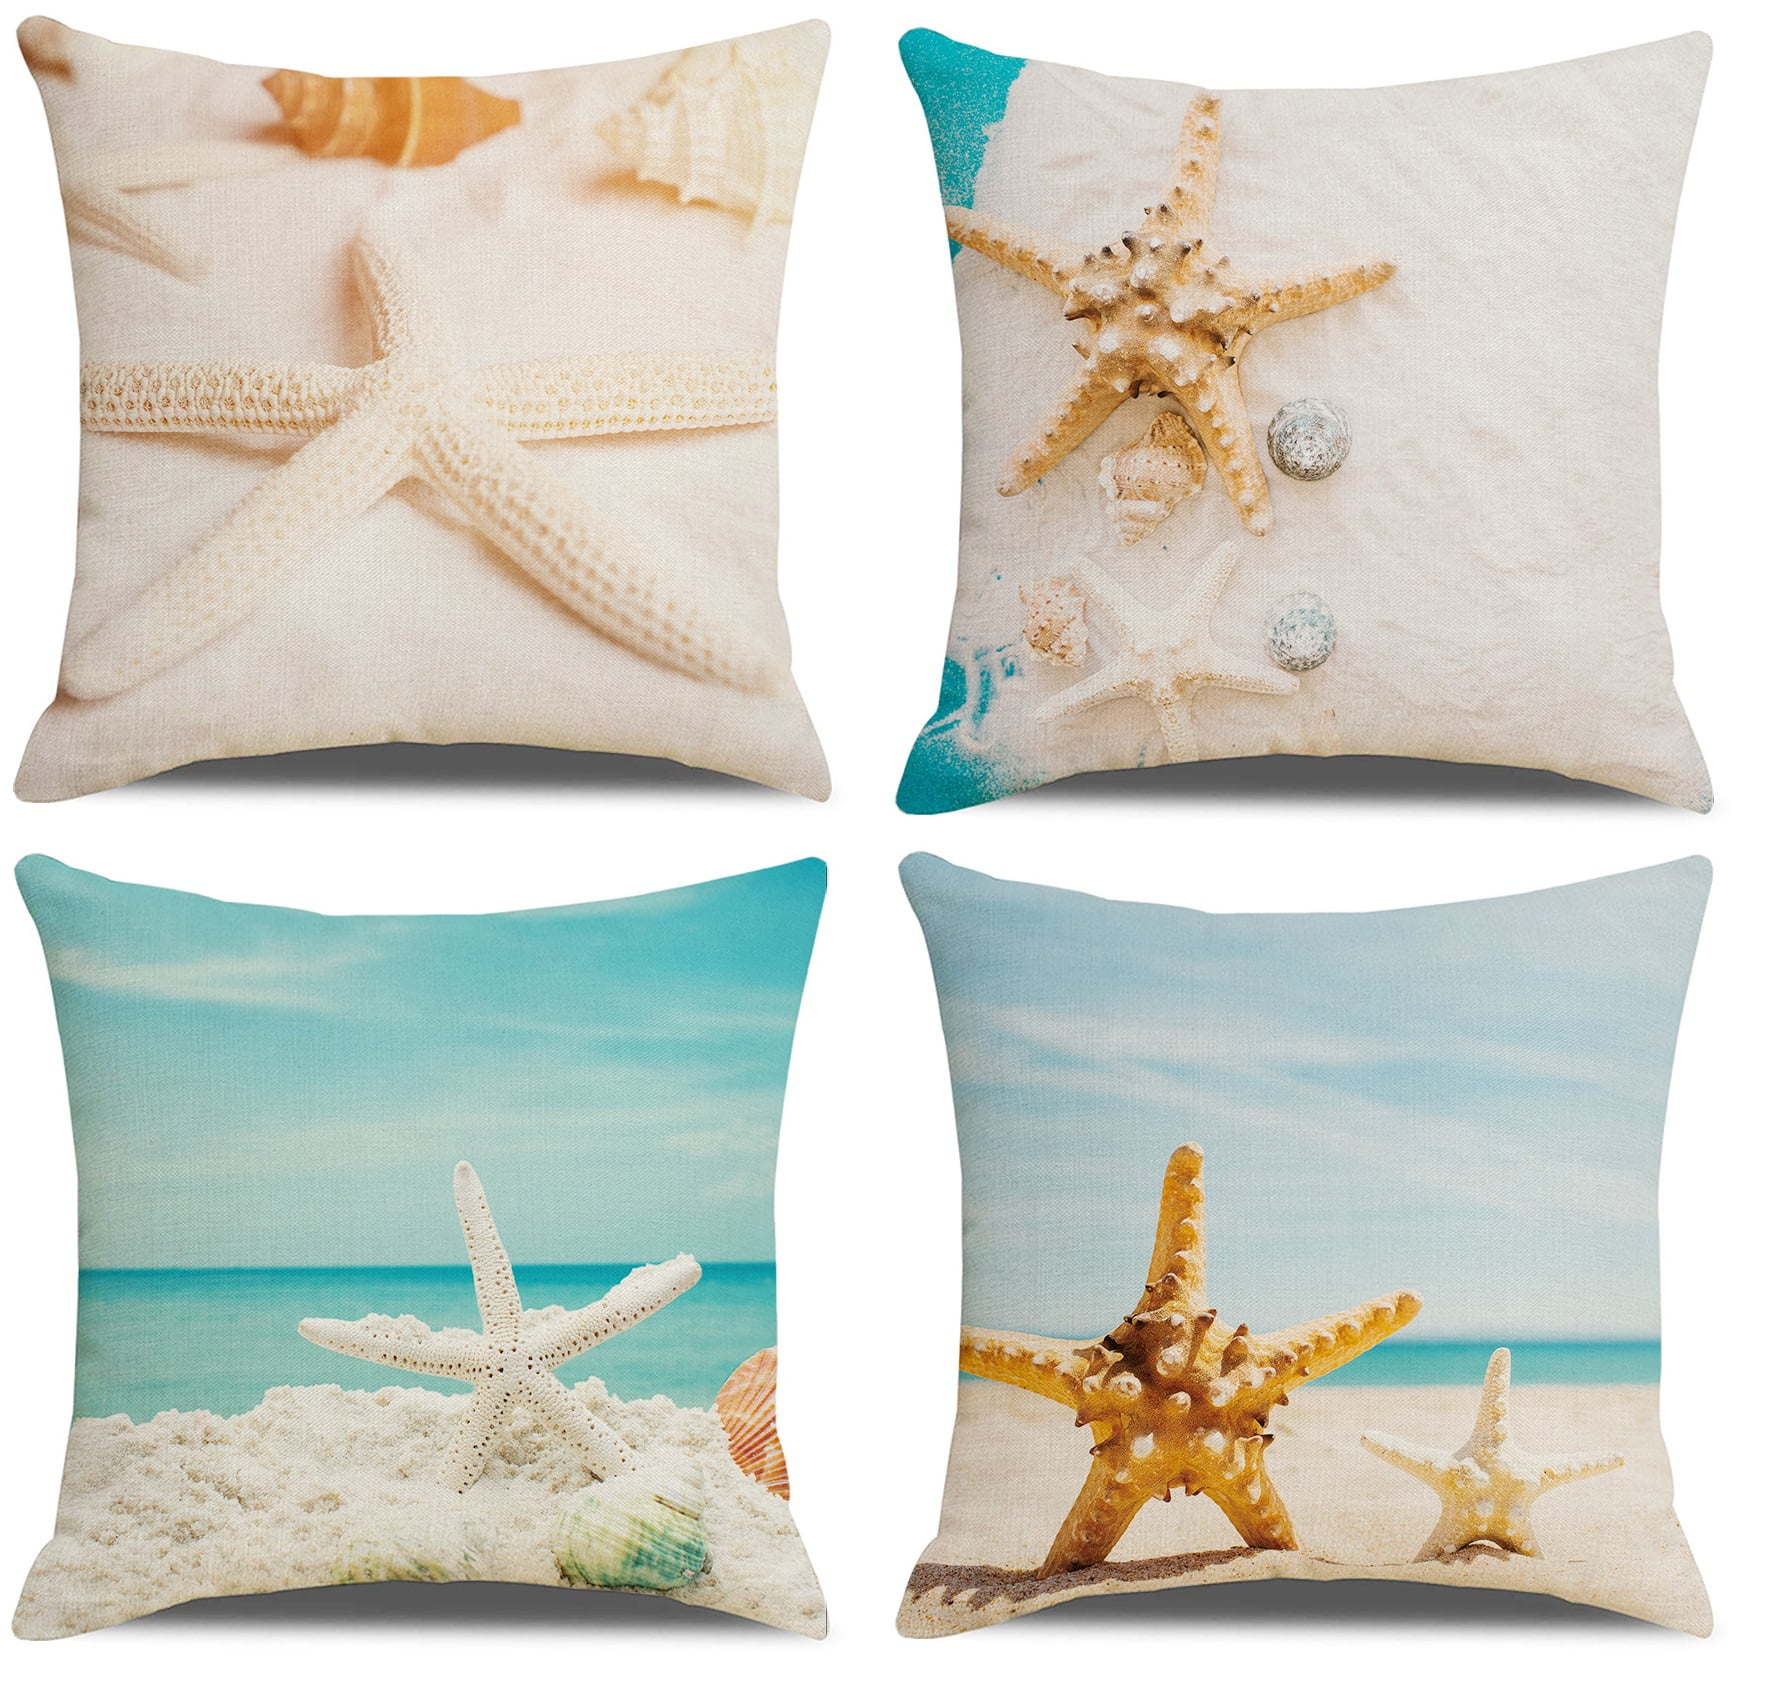 MaSiledy Large Couch Pillows Seashell Pillow Covers 18x18 Coastal  Nautical Theme Zippered Pillow Cover Decorative Outdoor Linen Fabric Pillow  Case